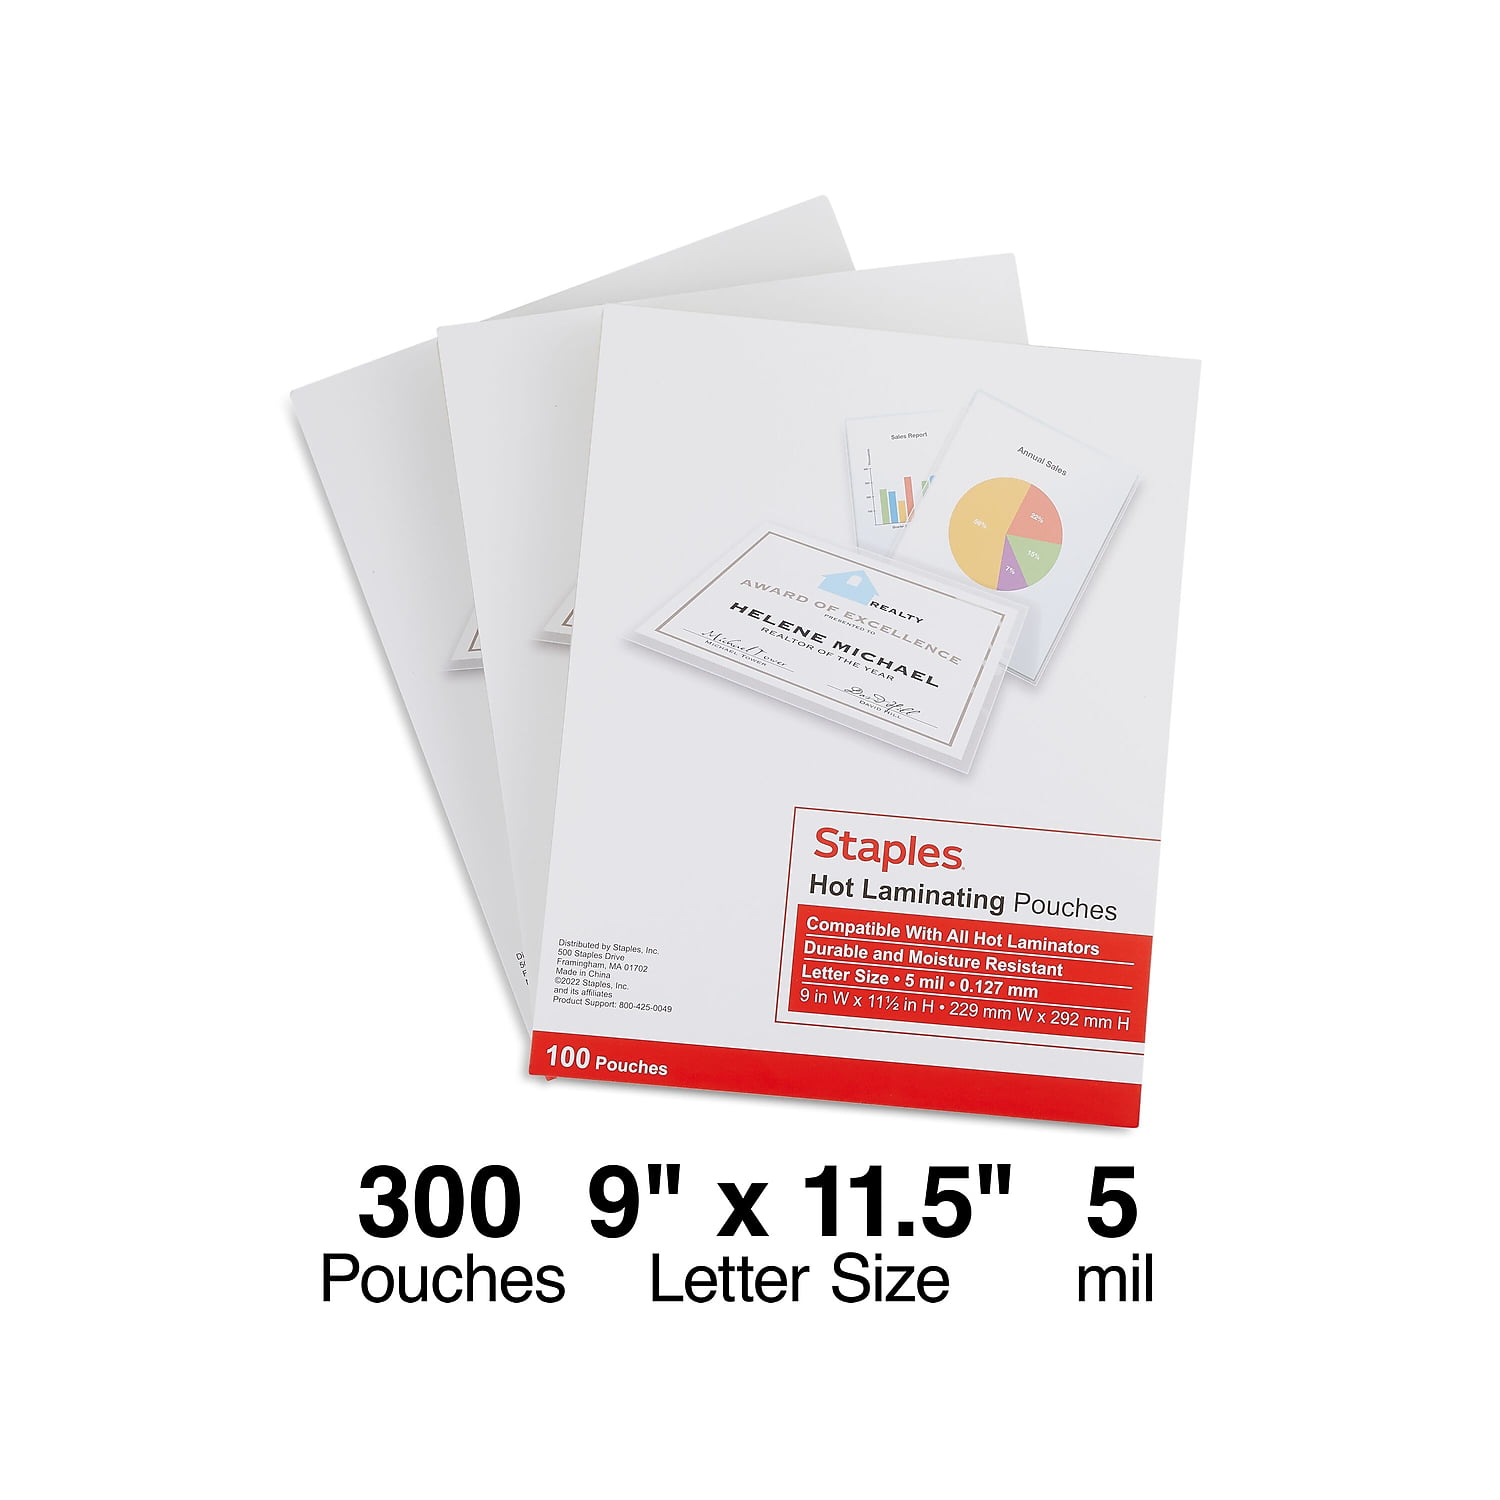 5 Mil Staples Hot Laminating Pouches Letter Size 9” X 11.5” 100 Ct 